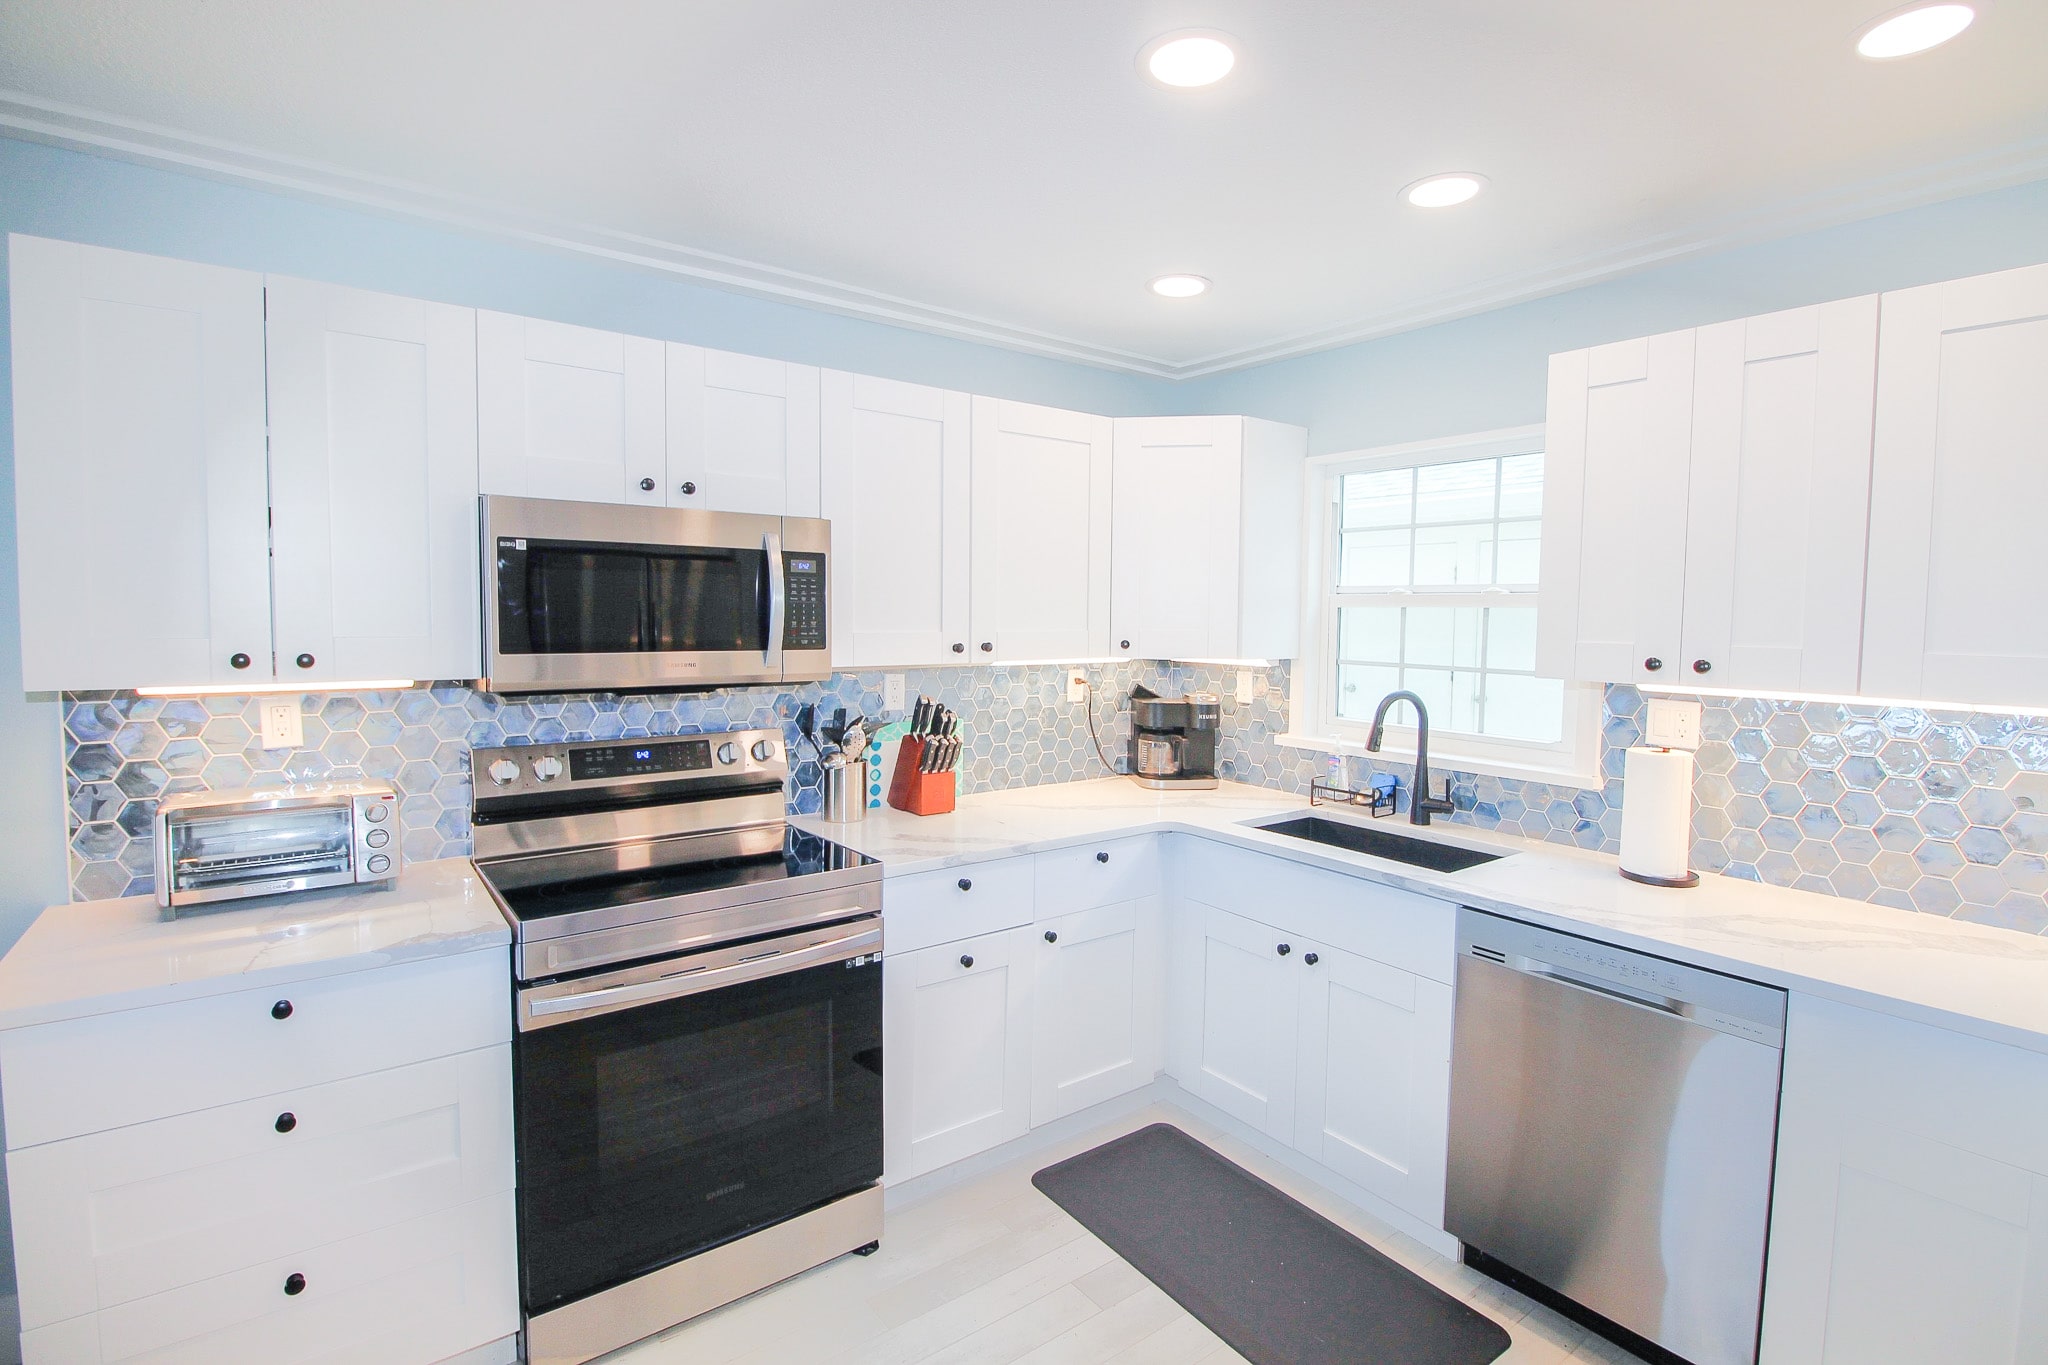 Stainless steel appliances in renovated kitchen